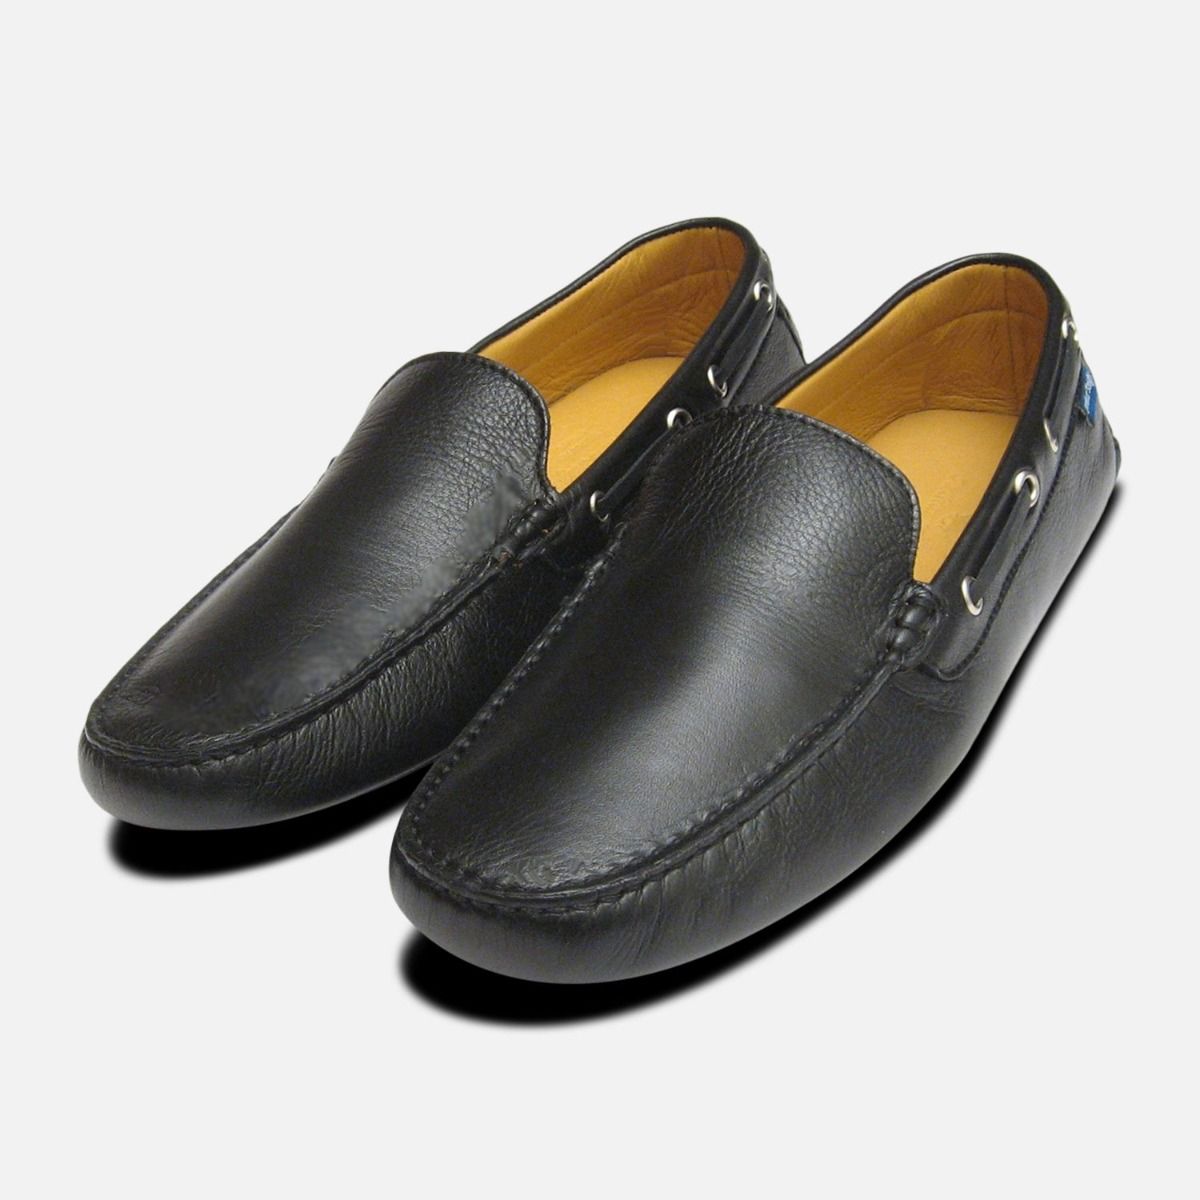 Mens Lucini Penny Loafer Slip On Italian Leather Smart Driving Shoes Casual Size 